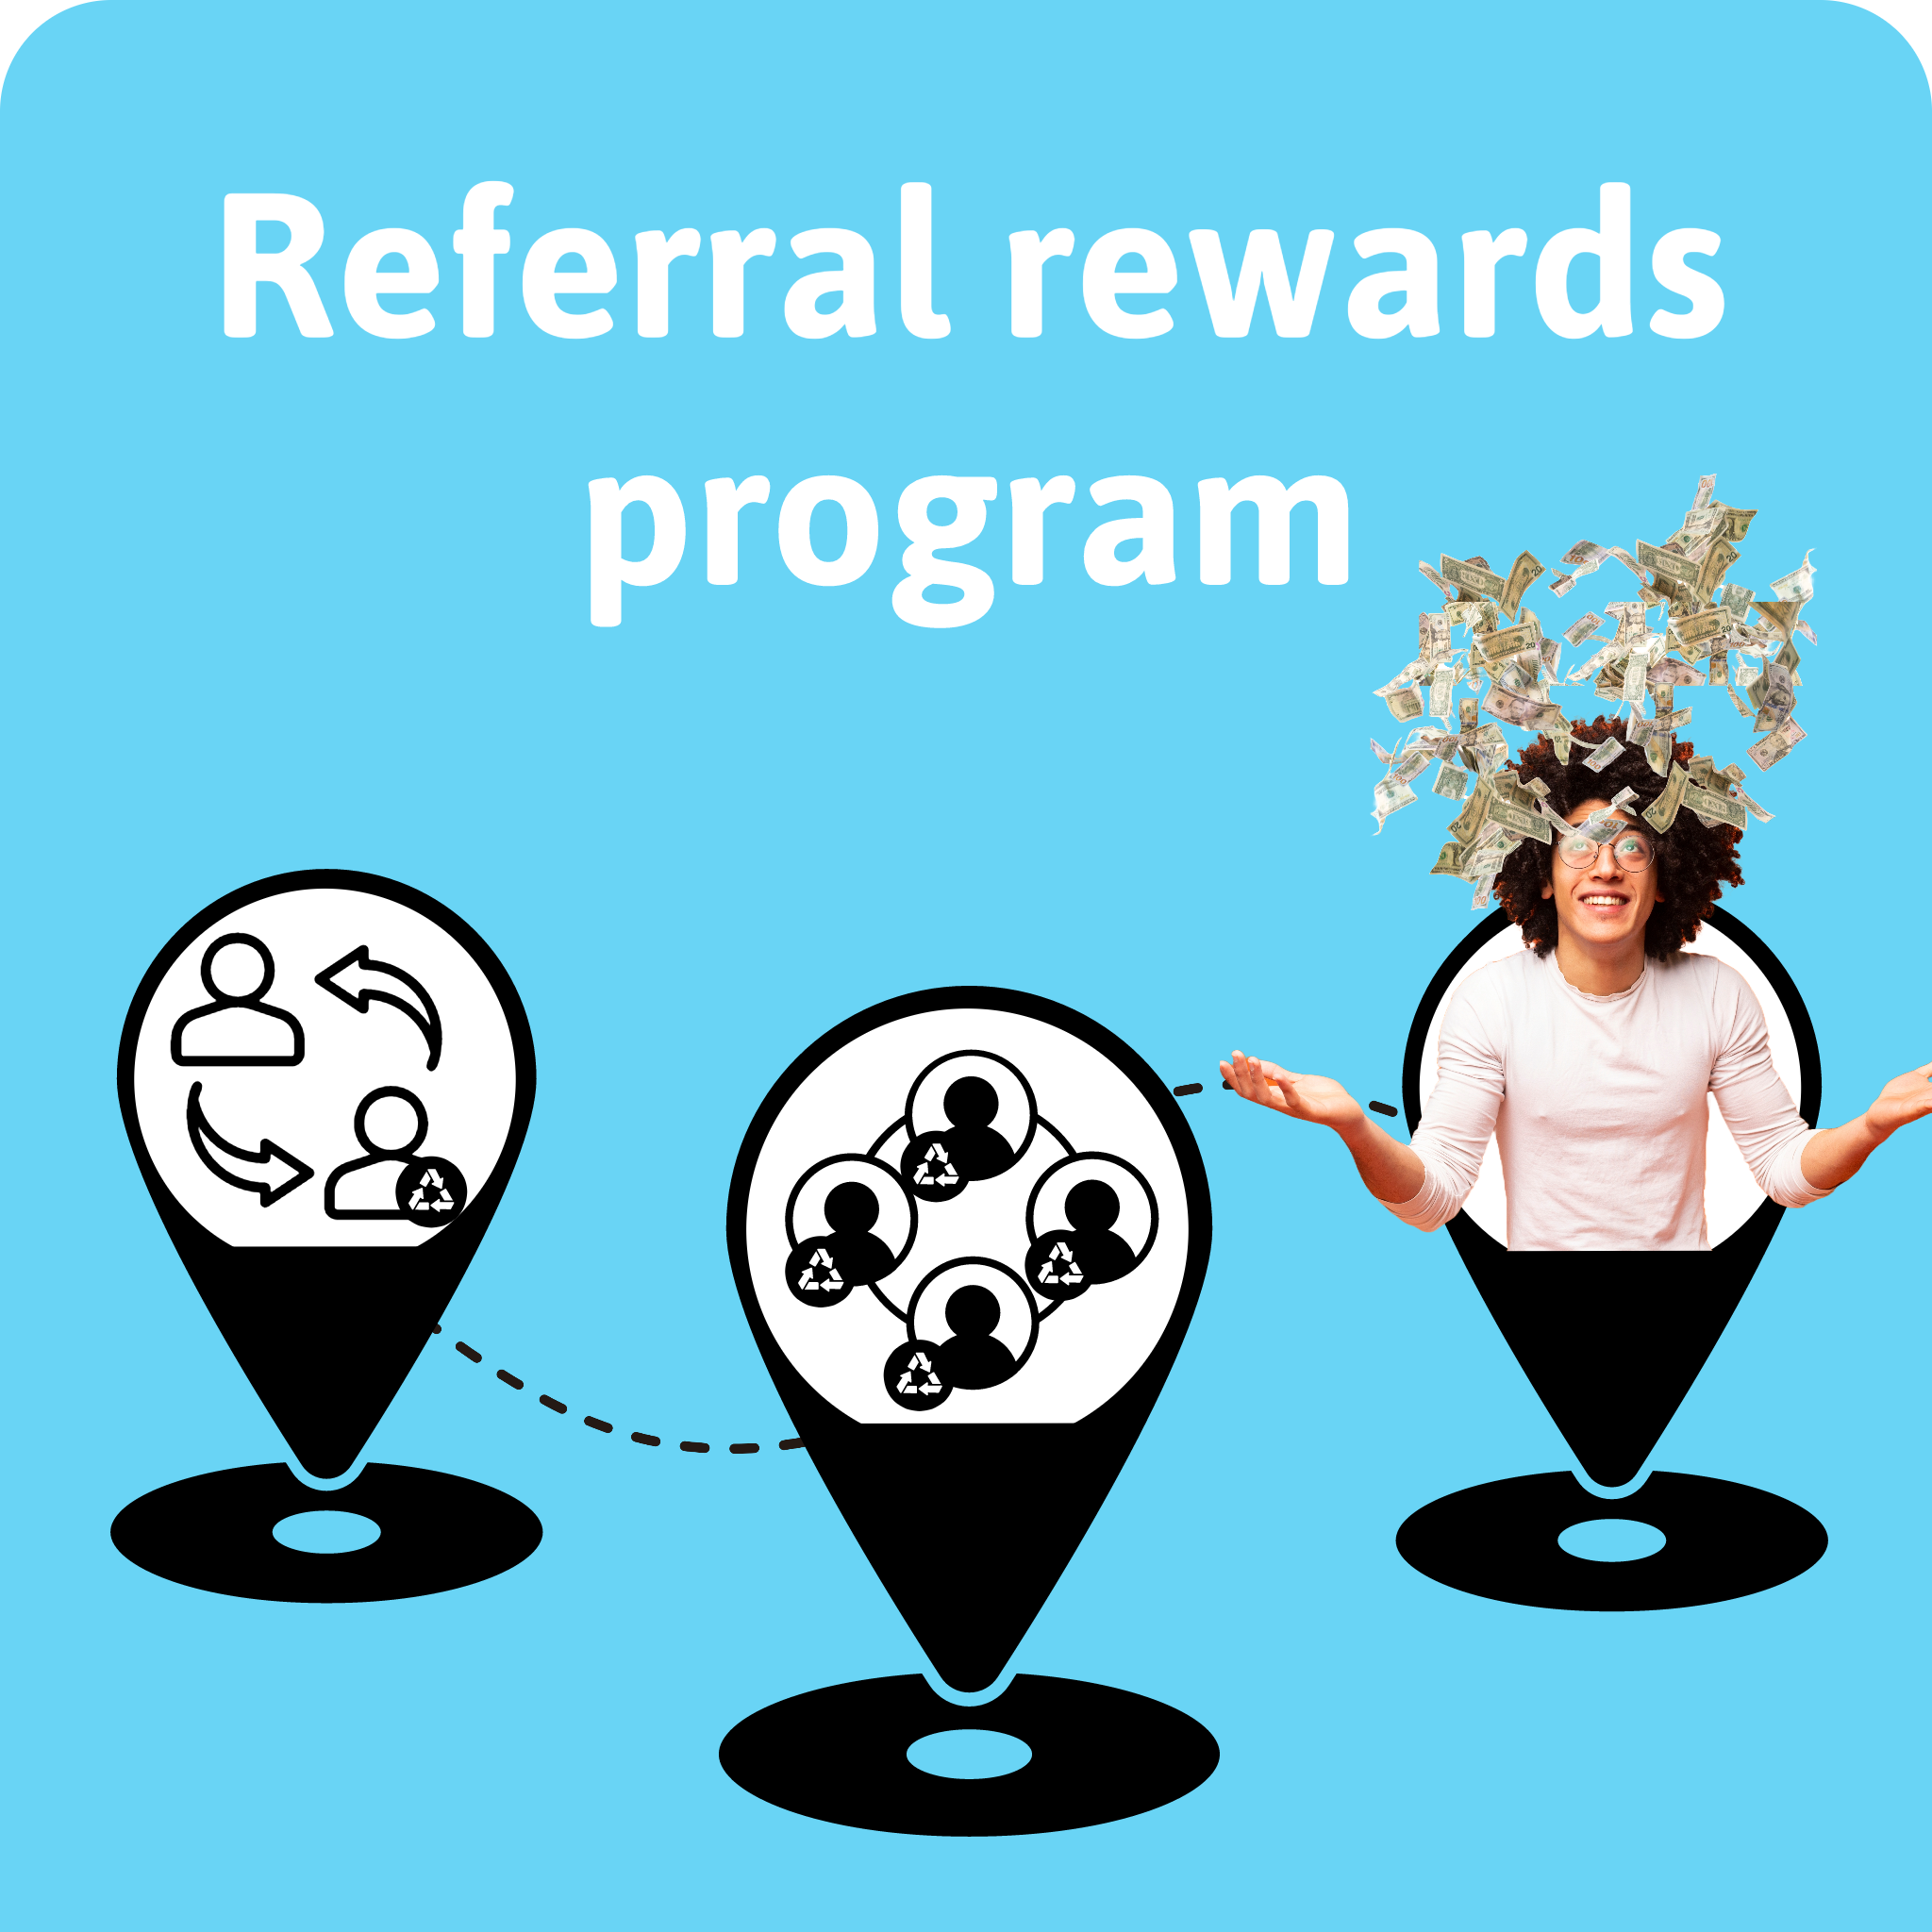 Referral rewards program is the text. White text on a blue background. Different thump tacks showcasing the referral process with a dotted arrow to a man with money raining on him.